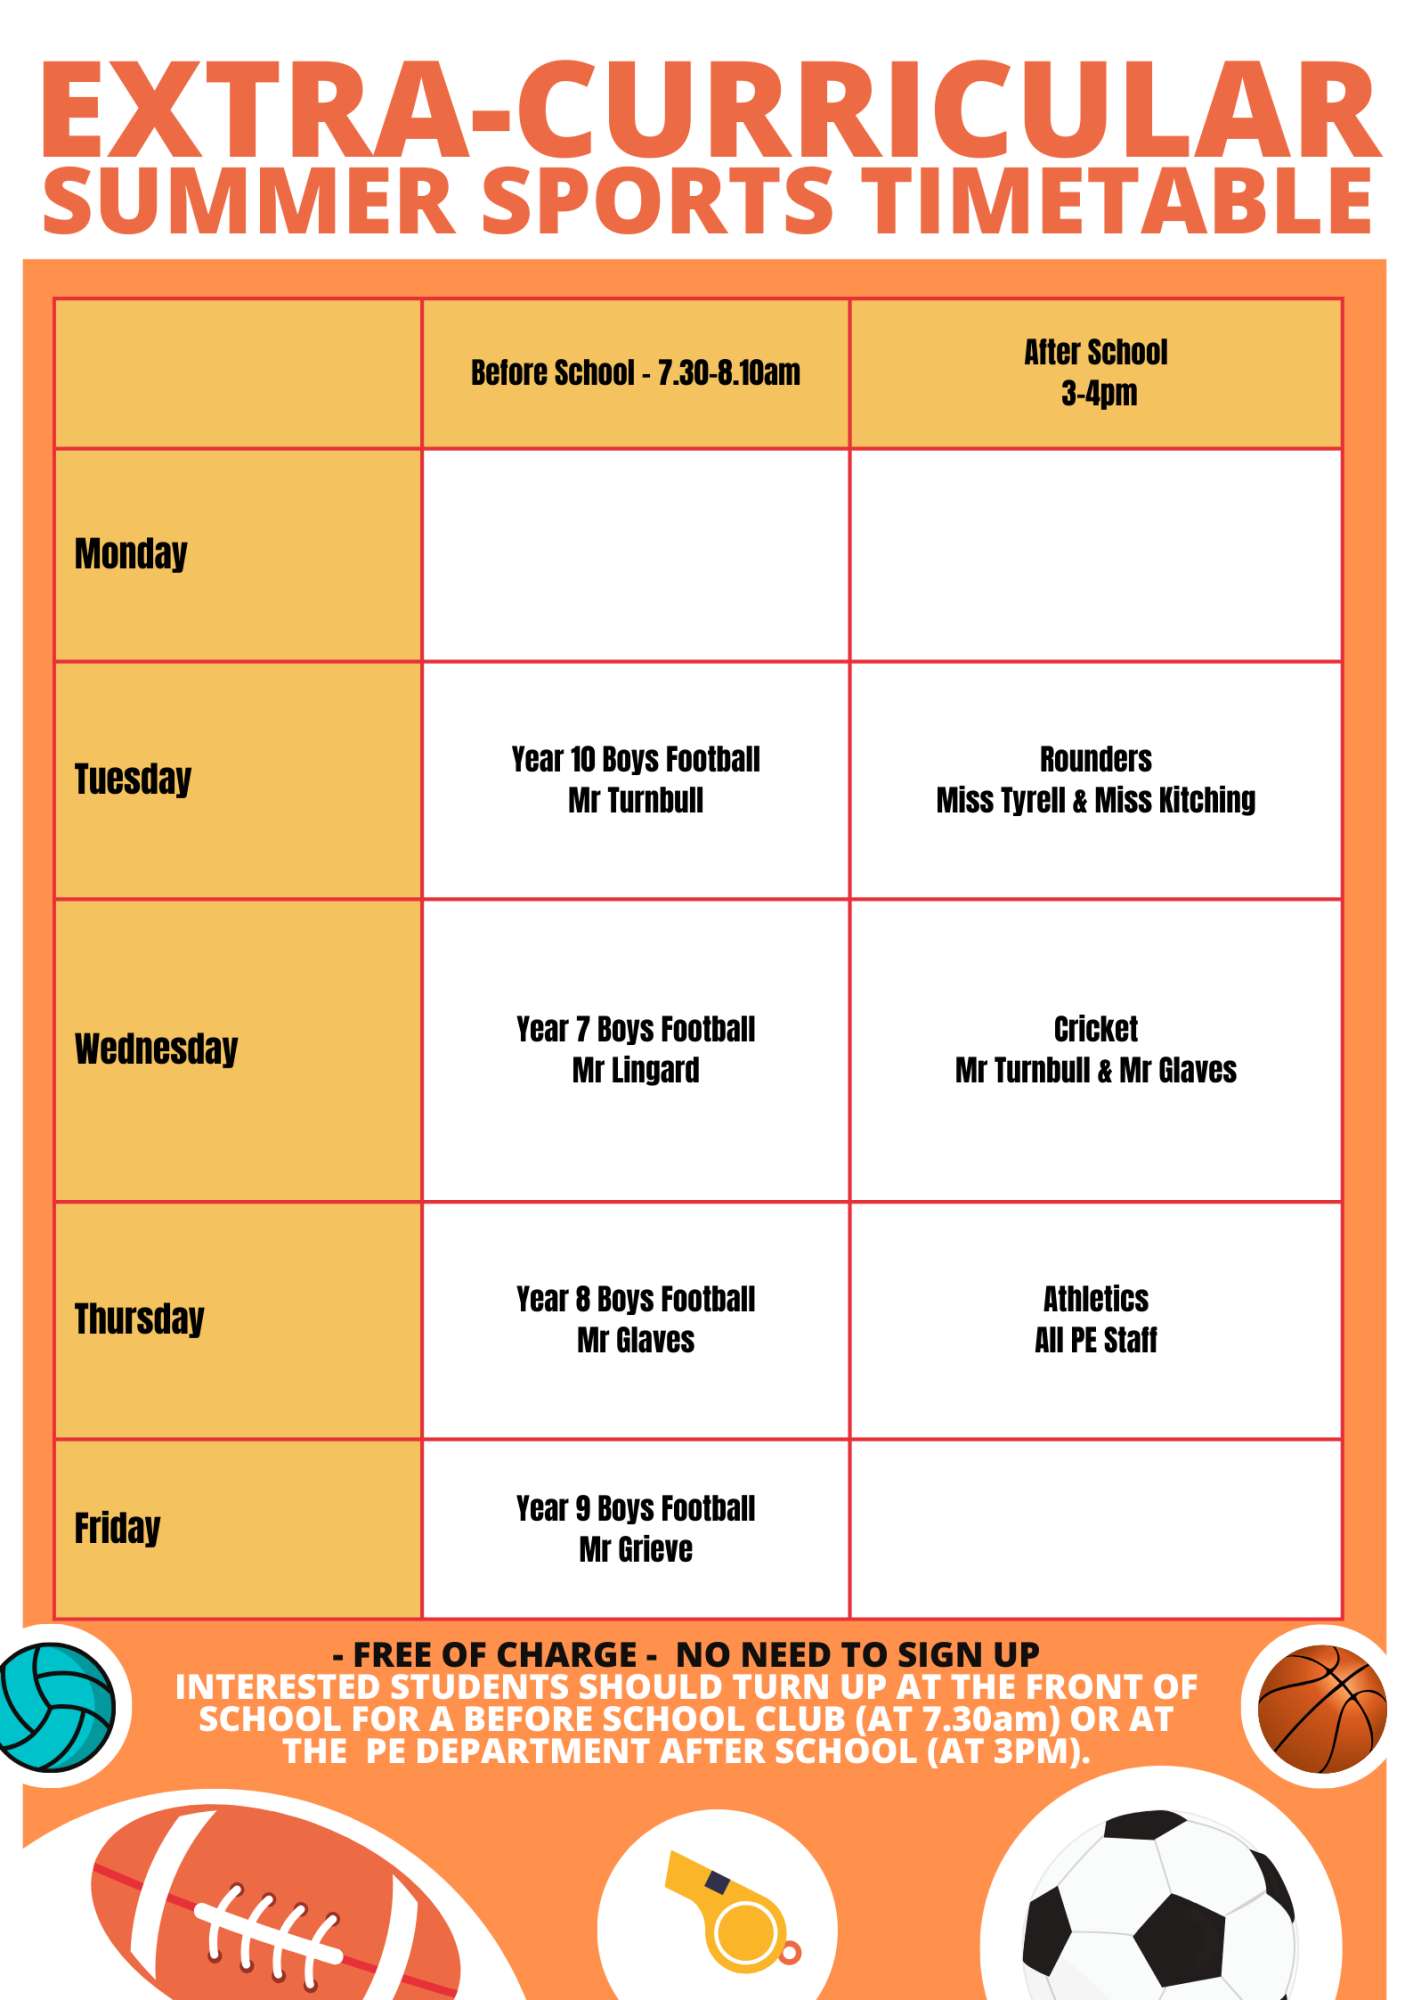 Copy of Extra Curricular Sports Timetable (3)